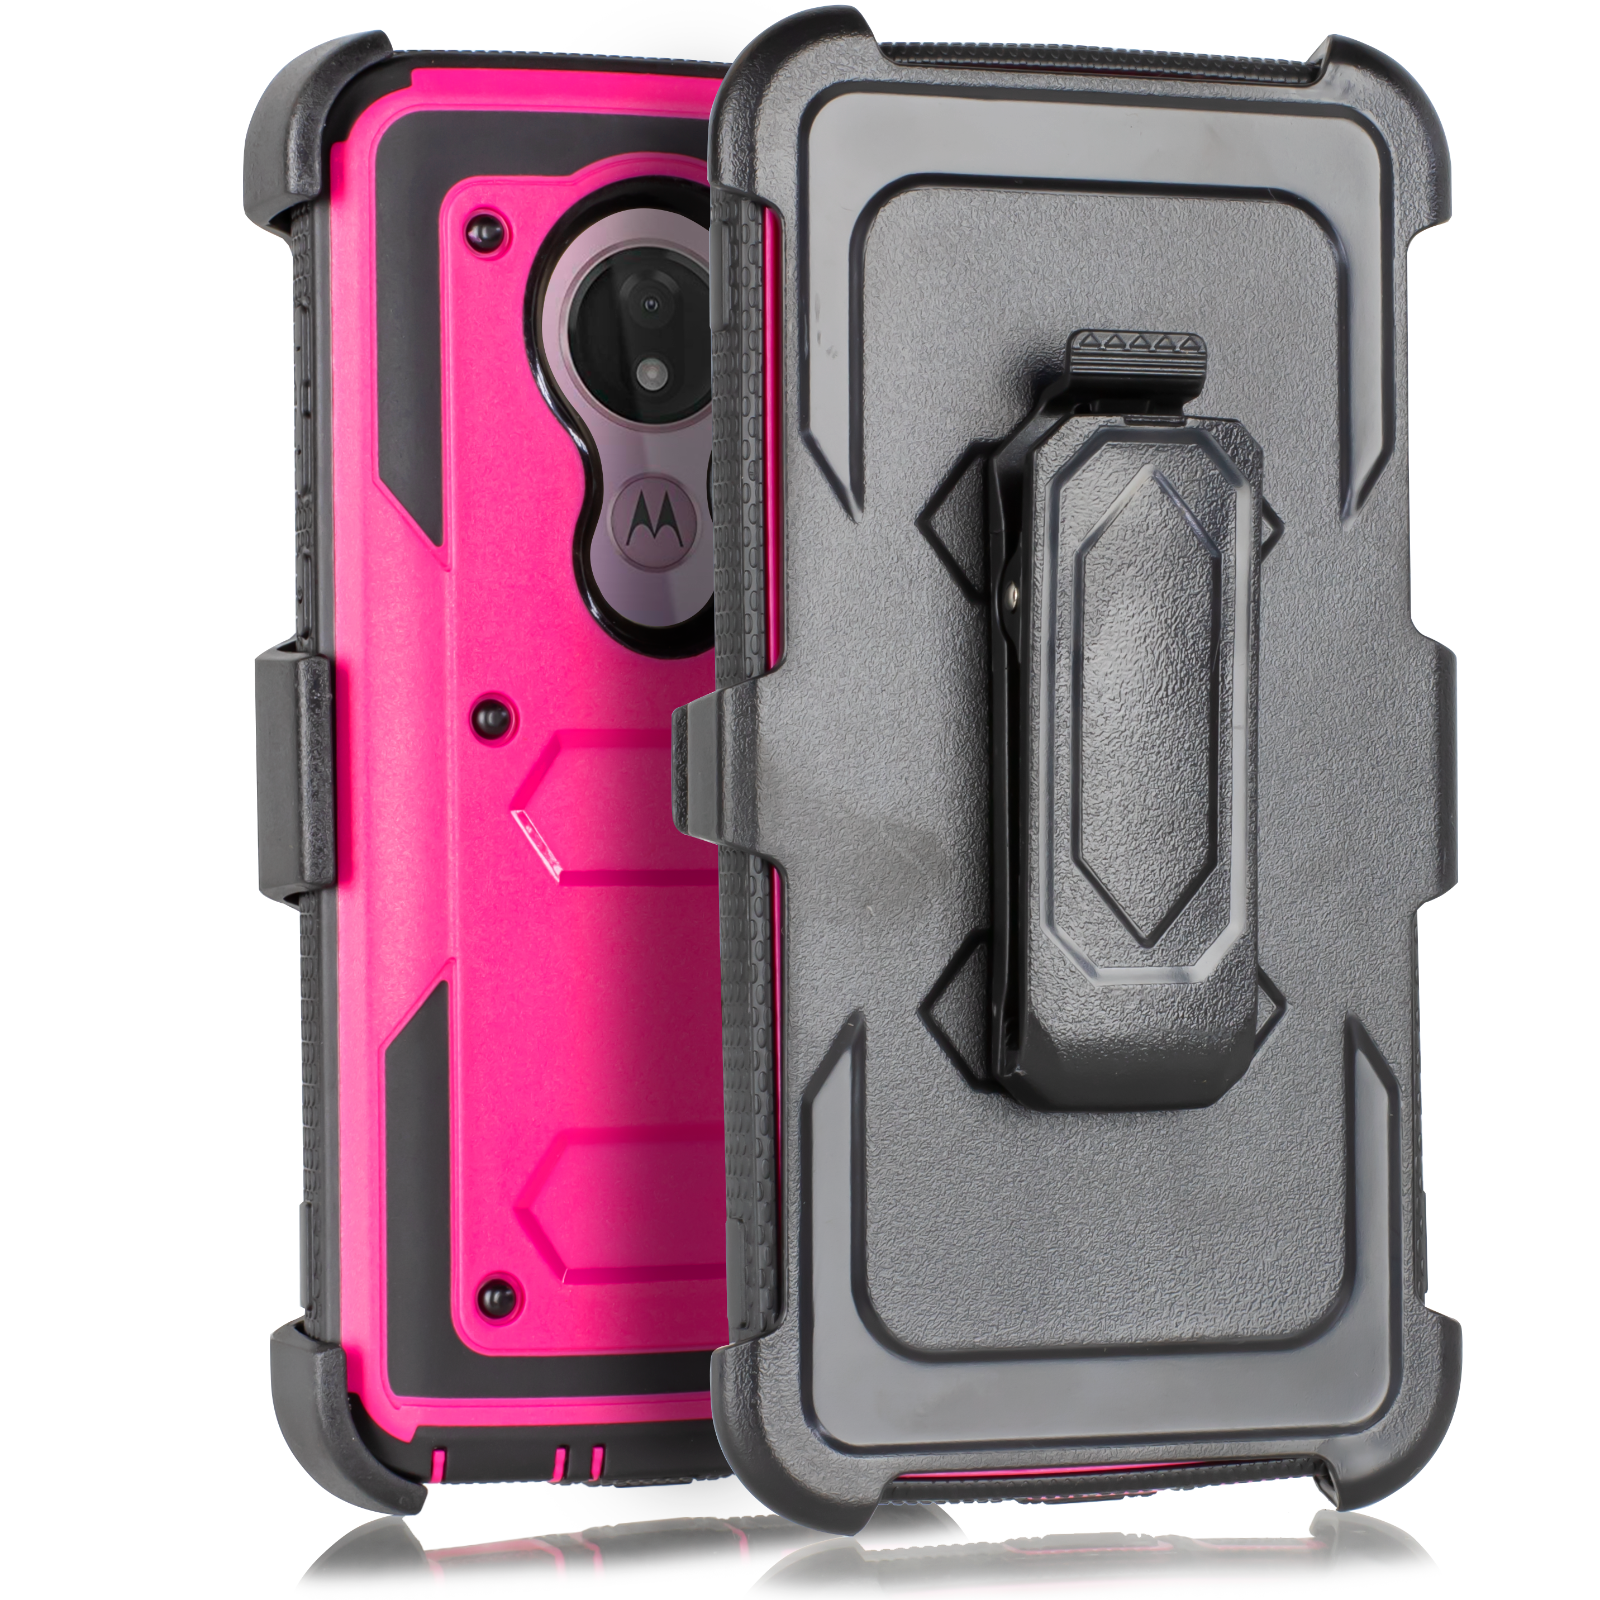 Value Pack ! for T-Mobile Revvlry+ Plus Case, Shockproof Full Body Protective Case Cover with Kickstand and Belt Swivel Clip Compatible with Motorola Moto G7 / Moto G7 Plus case Phone Case 360° (Pink) - image 3 of 4